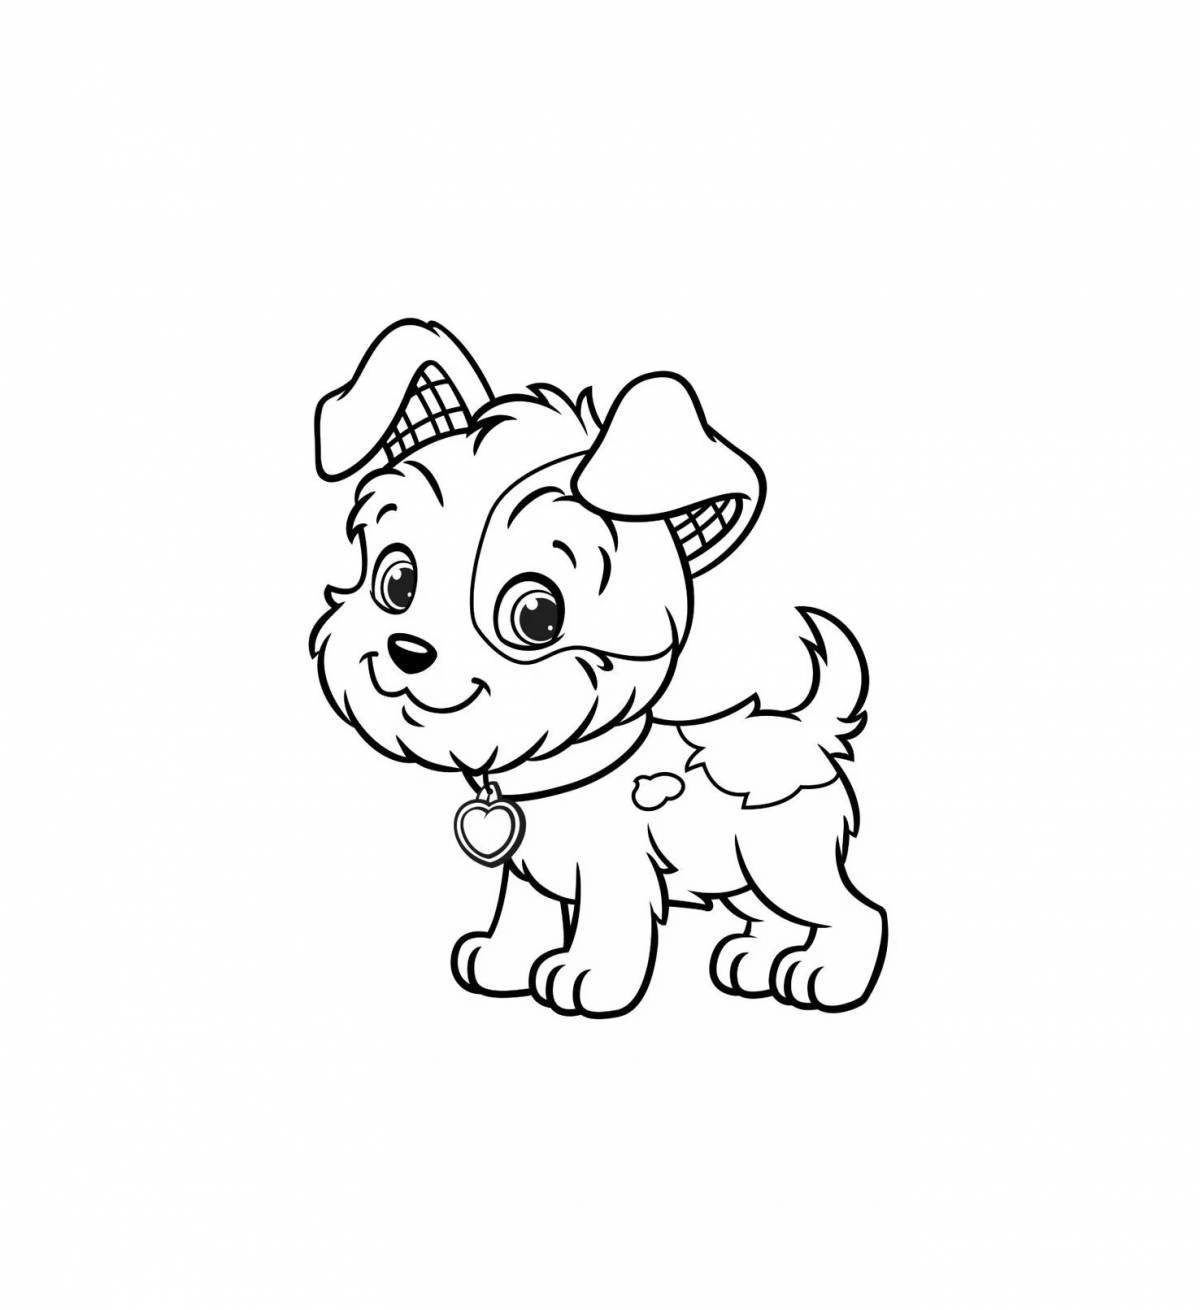 Sleeping puppies coloring pages for girls